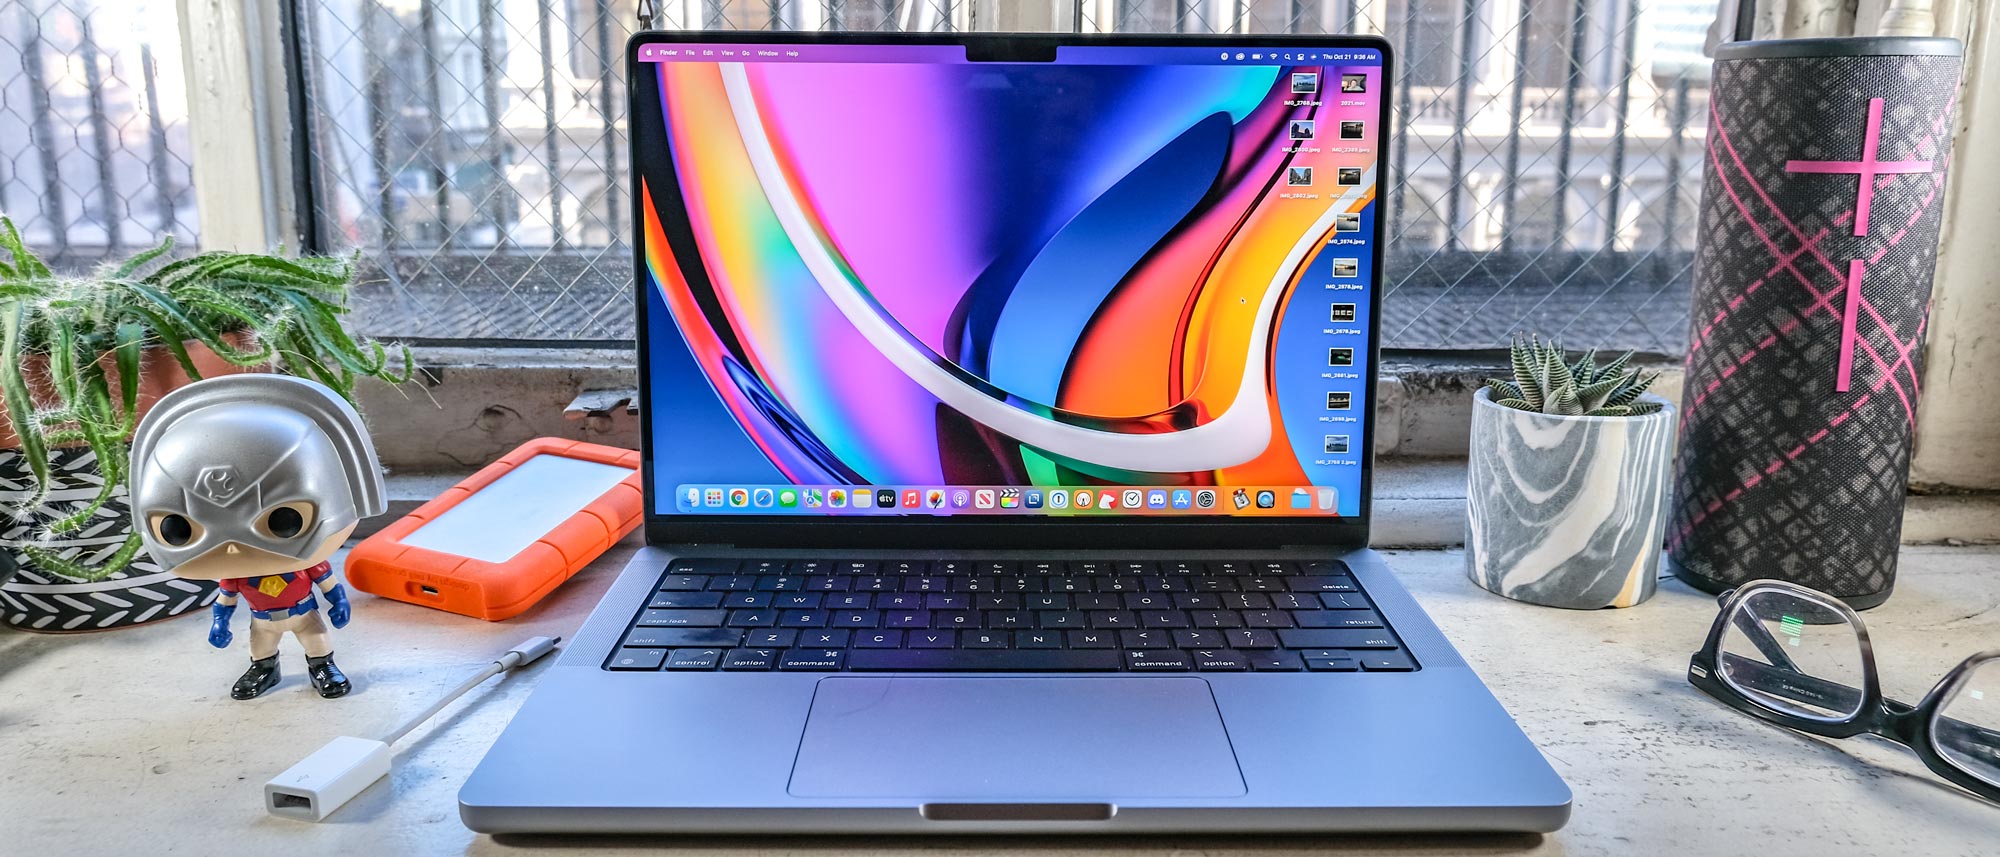 14in MacBook Pro review: putting power back in Apple's laptop